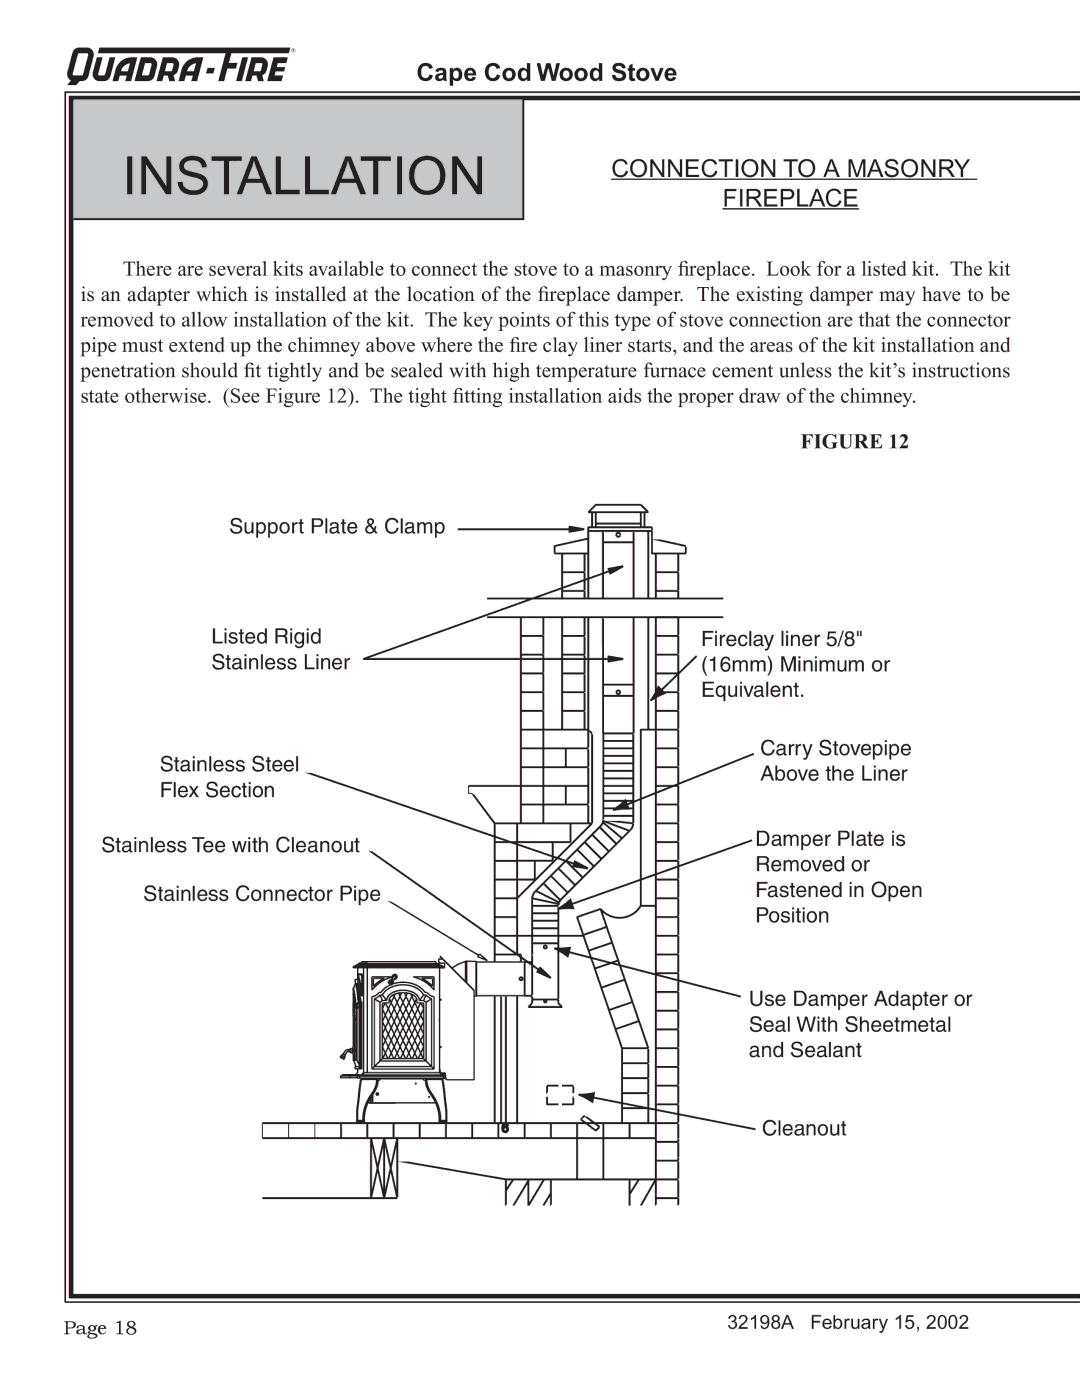 Quadra-Fire 32198A installation instructions Connection to a Masonry Fireplace 